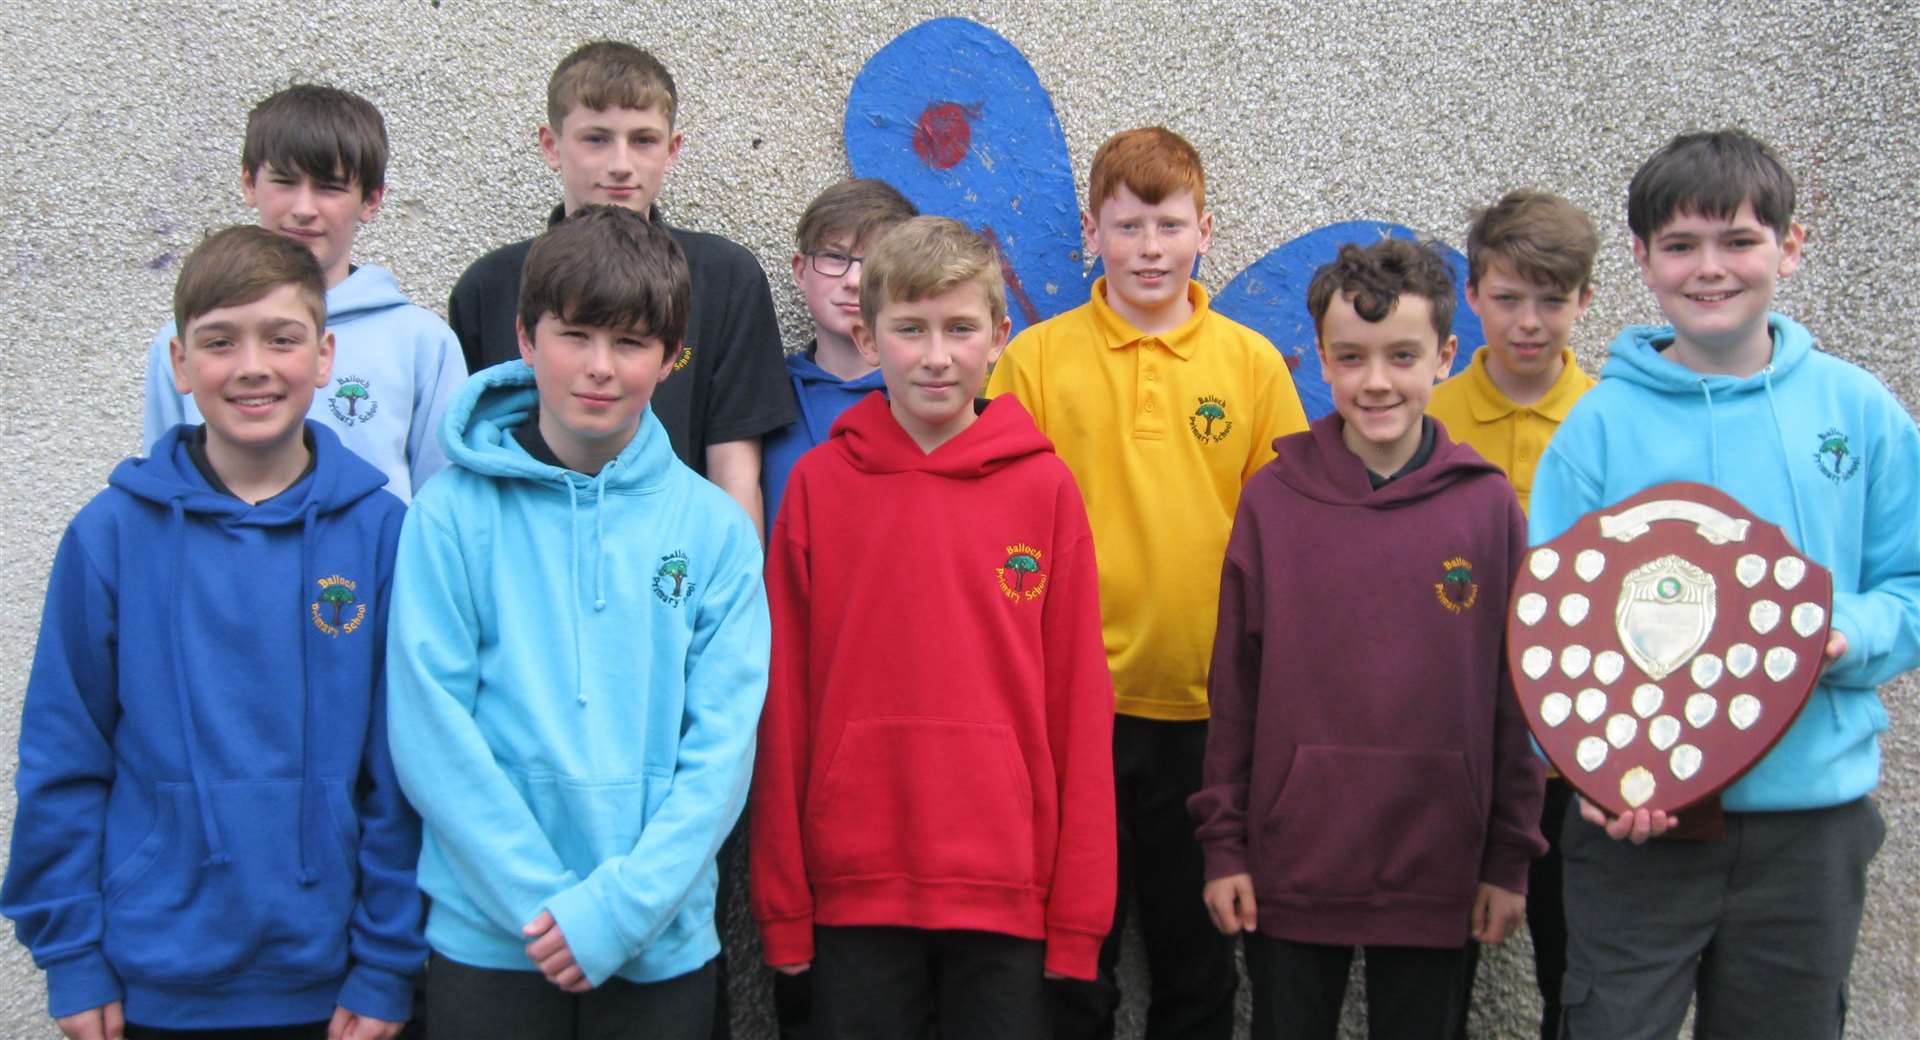 Some of the successful youngsters from Balloch Primary who won the National Minibridge Trophy.